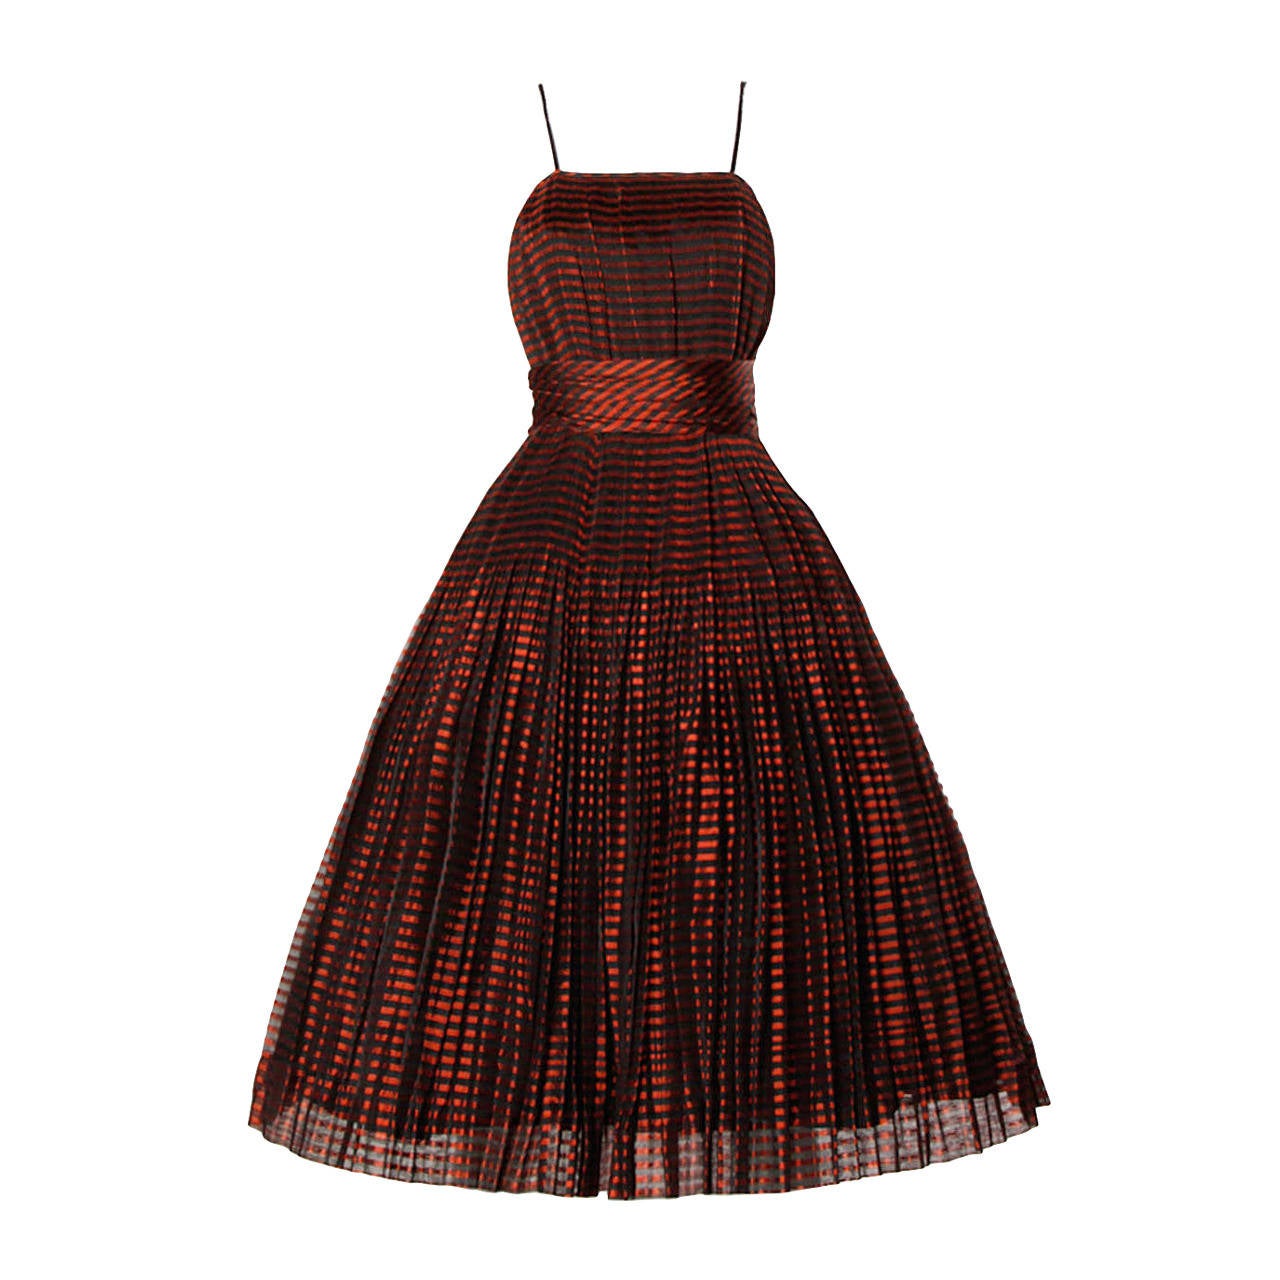 Vintage 1940s Irridescent Crystal Pleated Red Stripe Dress + Wrap